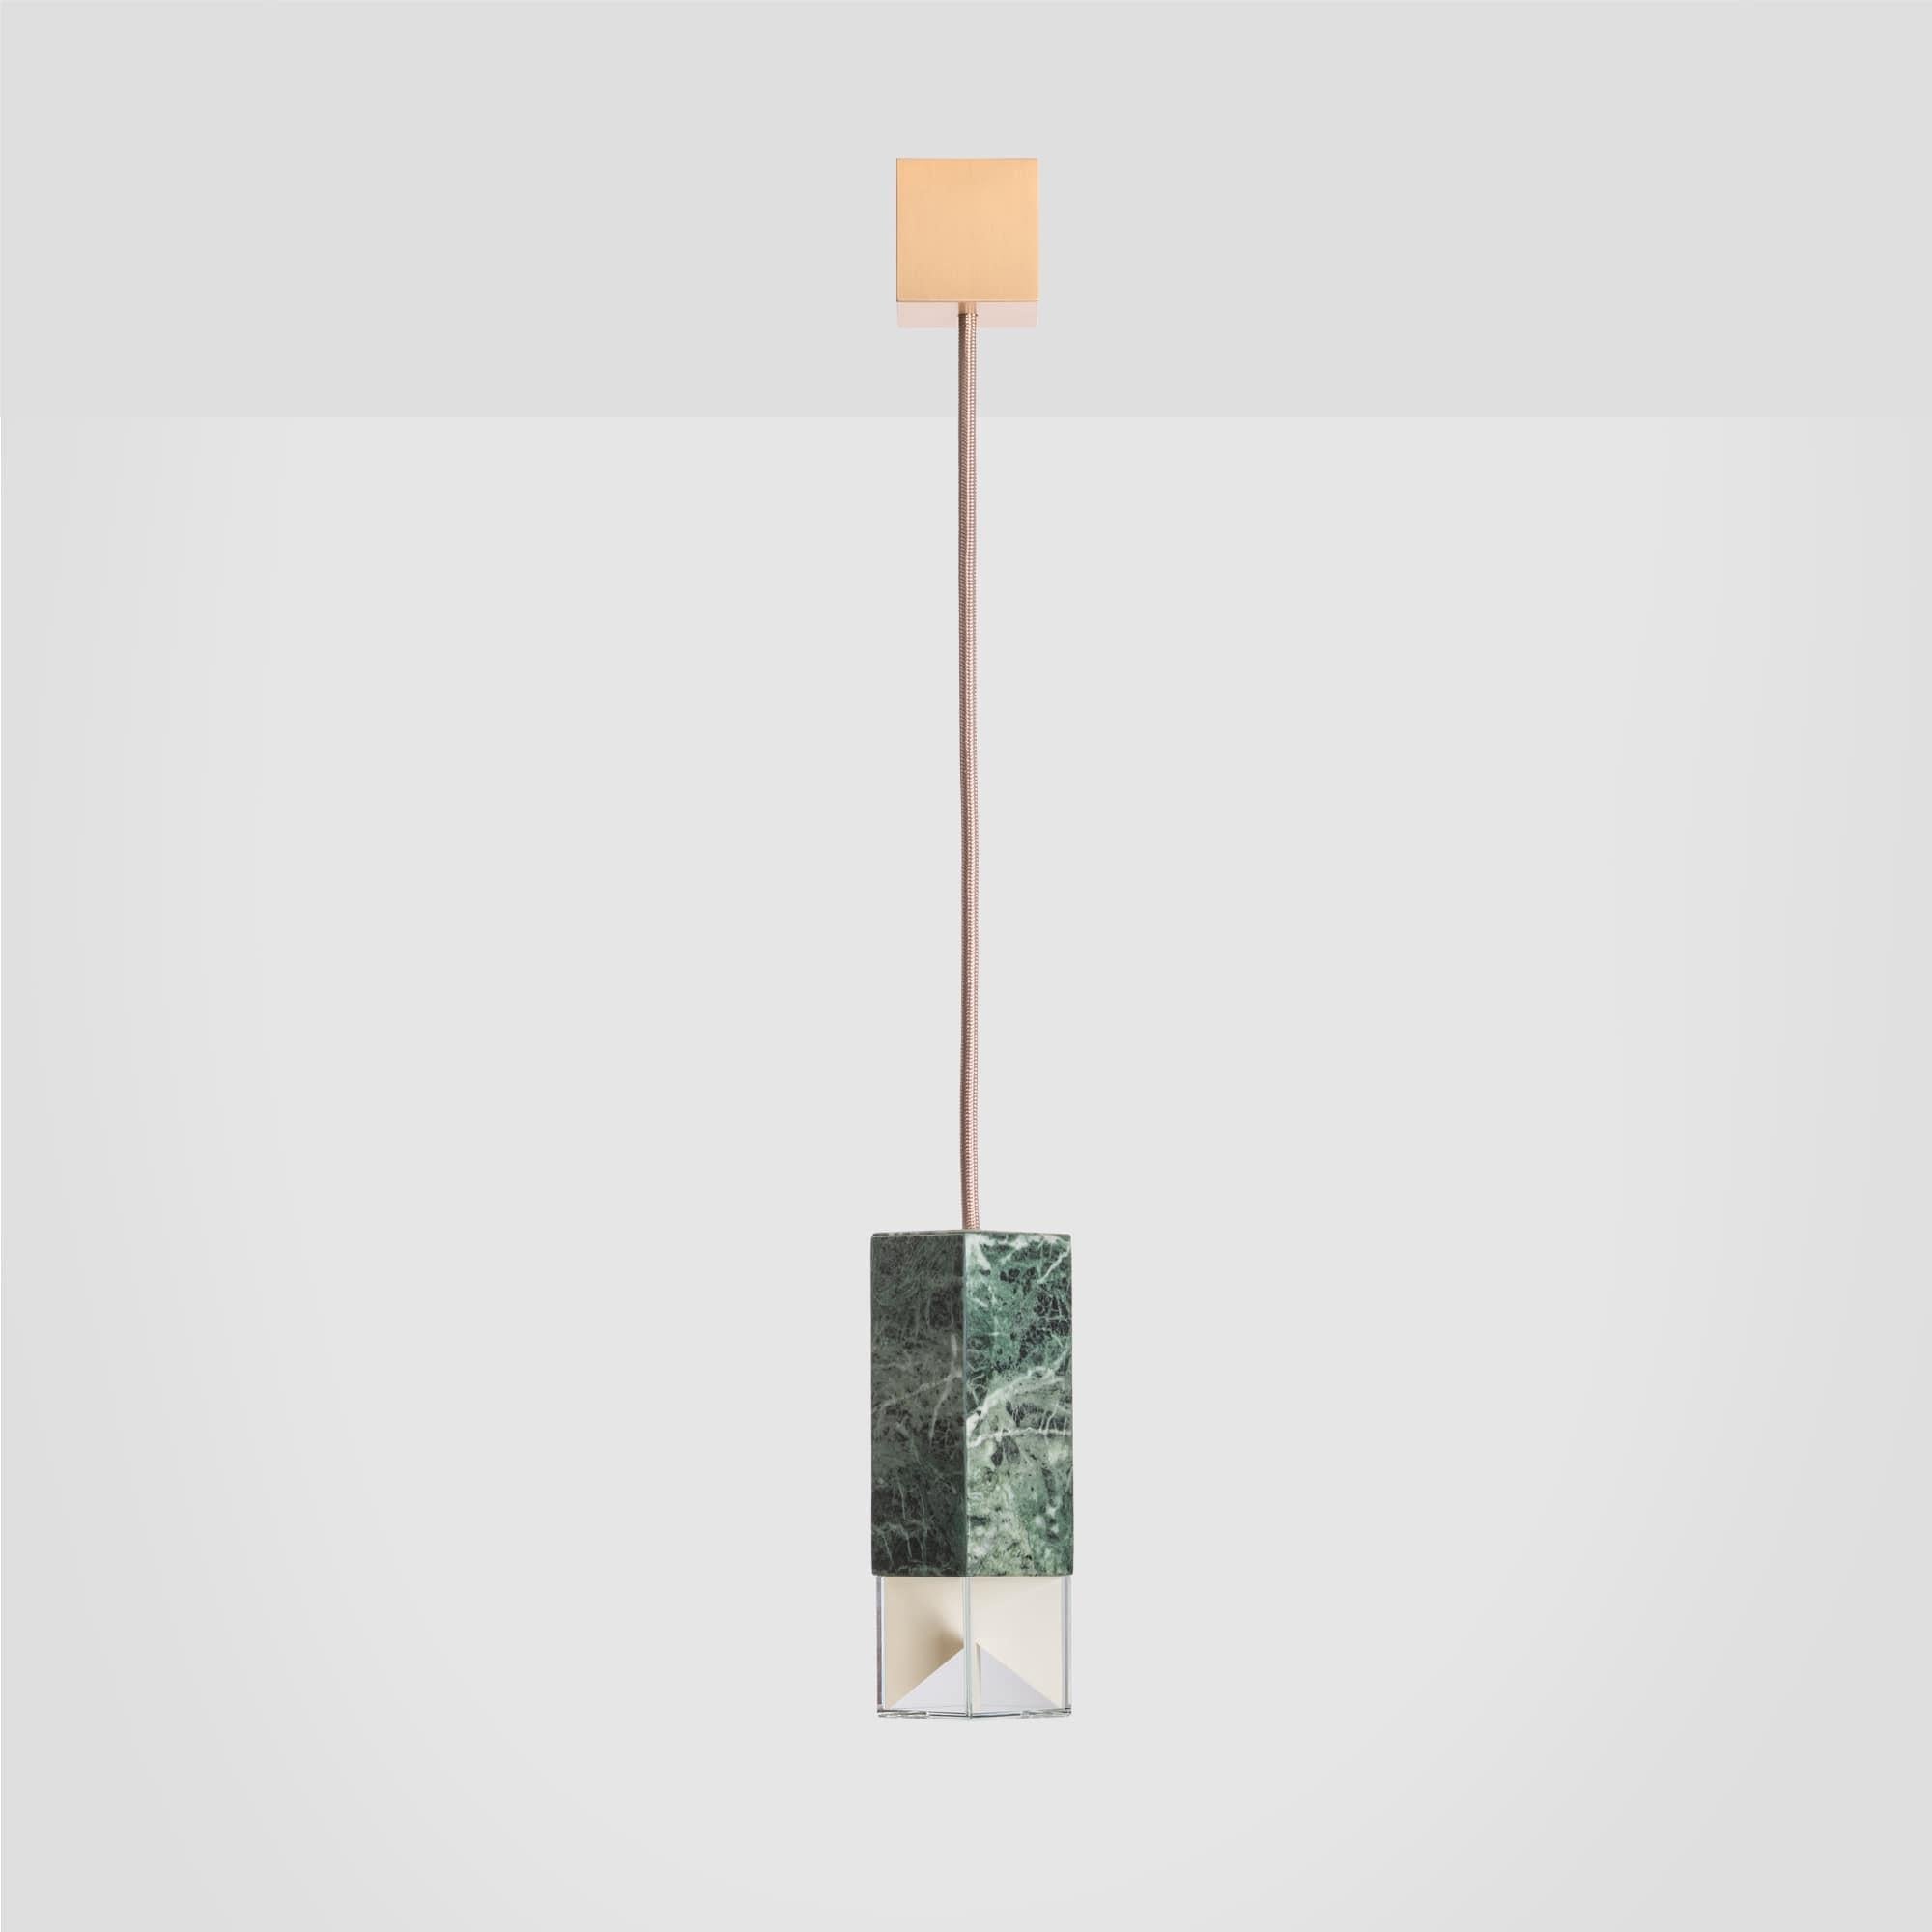 Lamp one color edition by Formaminima
Dimensions: 5 x 5 x H 17 cm
Materials: Lamp body in marble Verde Alpi
Ultra- thin anti-reflection crystal diffuser
Inside- diffuser Limoges biscuit-finish porcelain sheets

Satin brass ceiling rose H 5 x 5